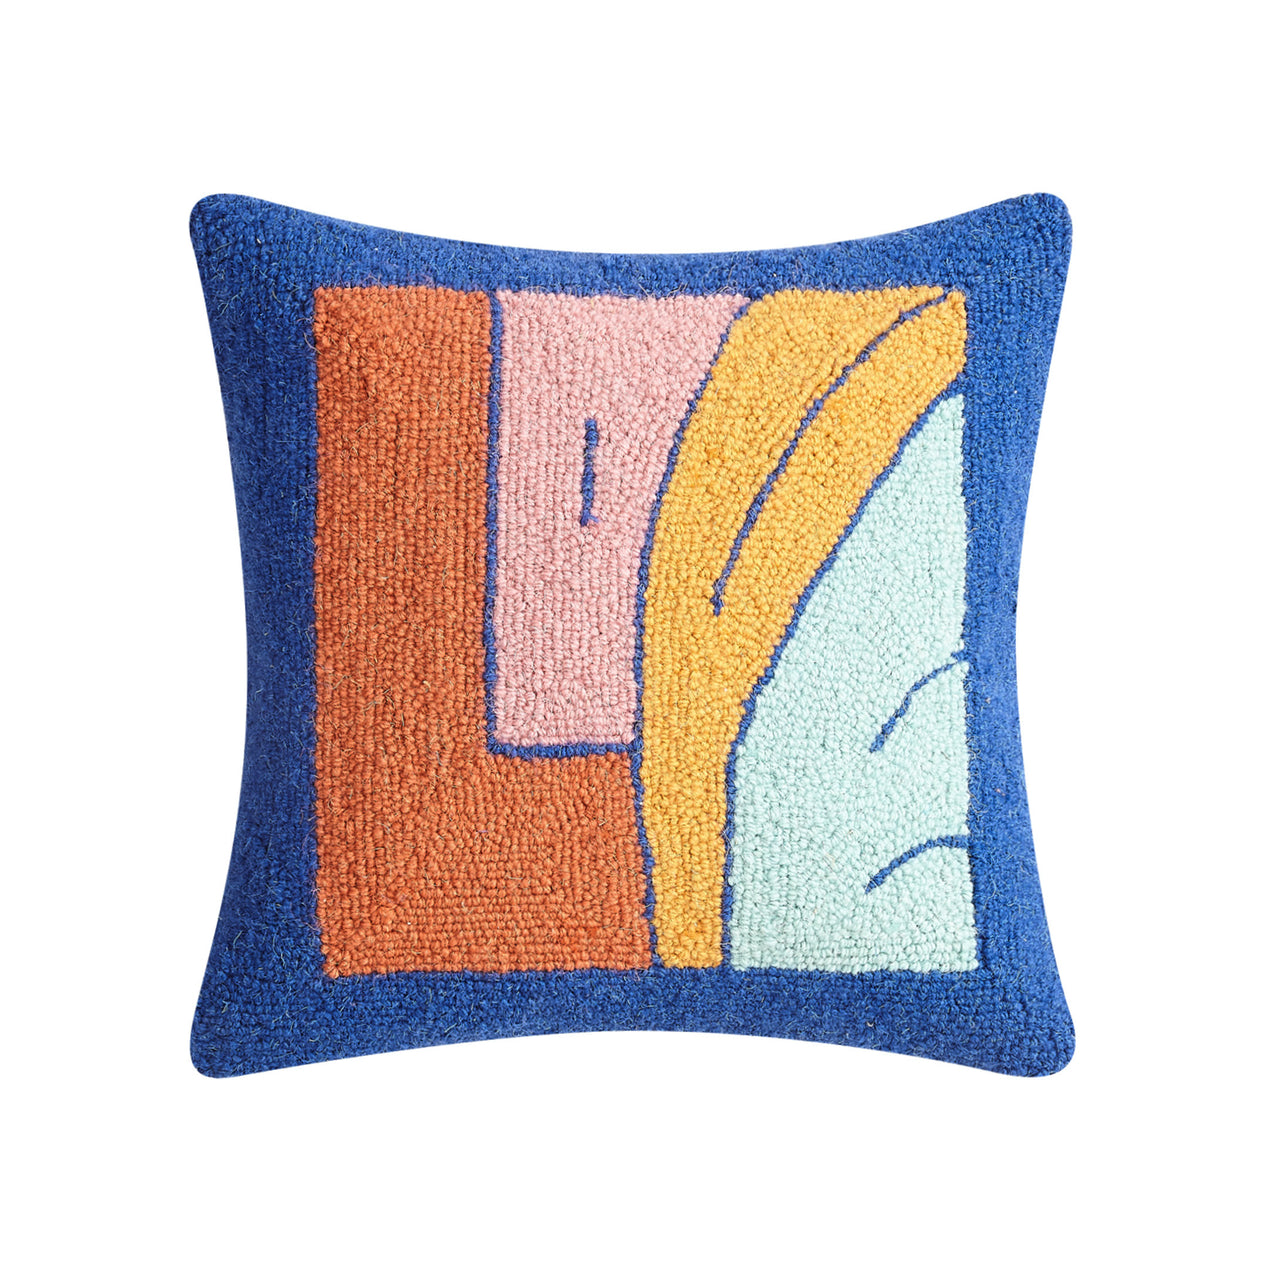 Together in Love Hook Pillow